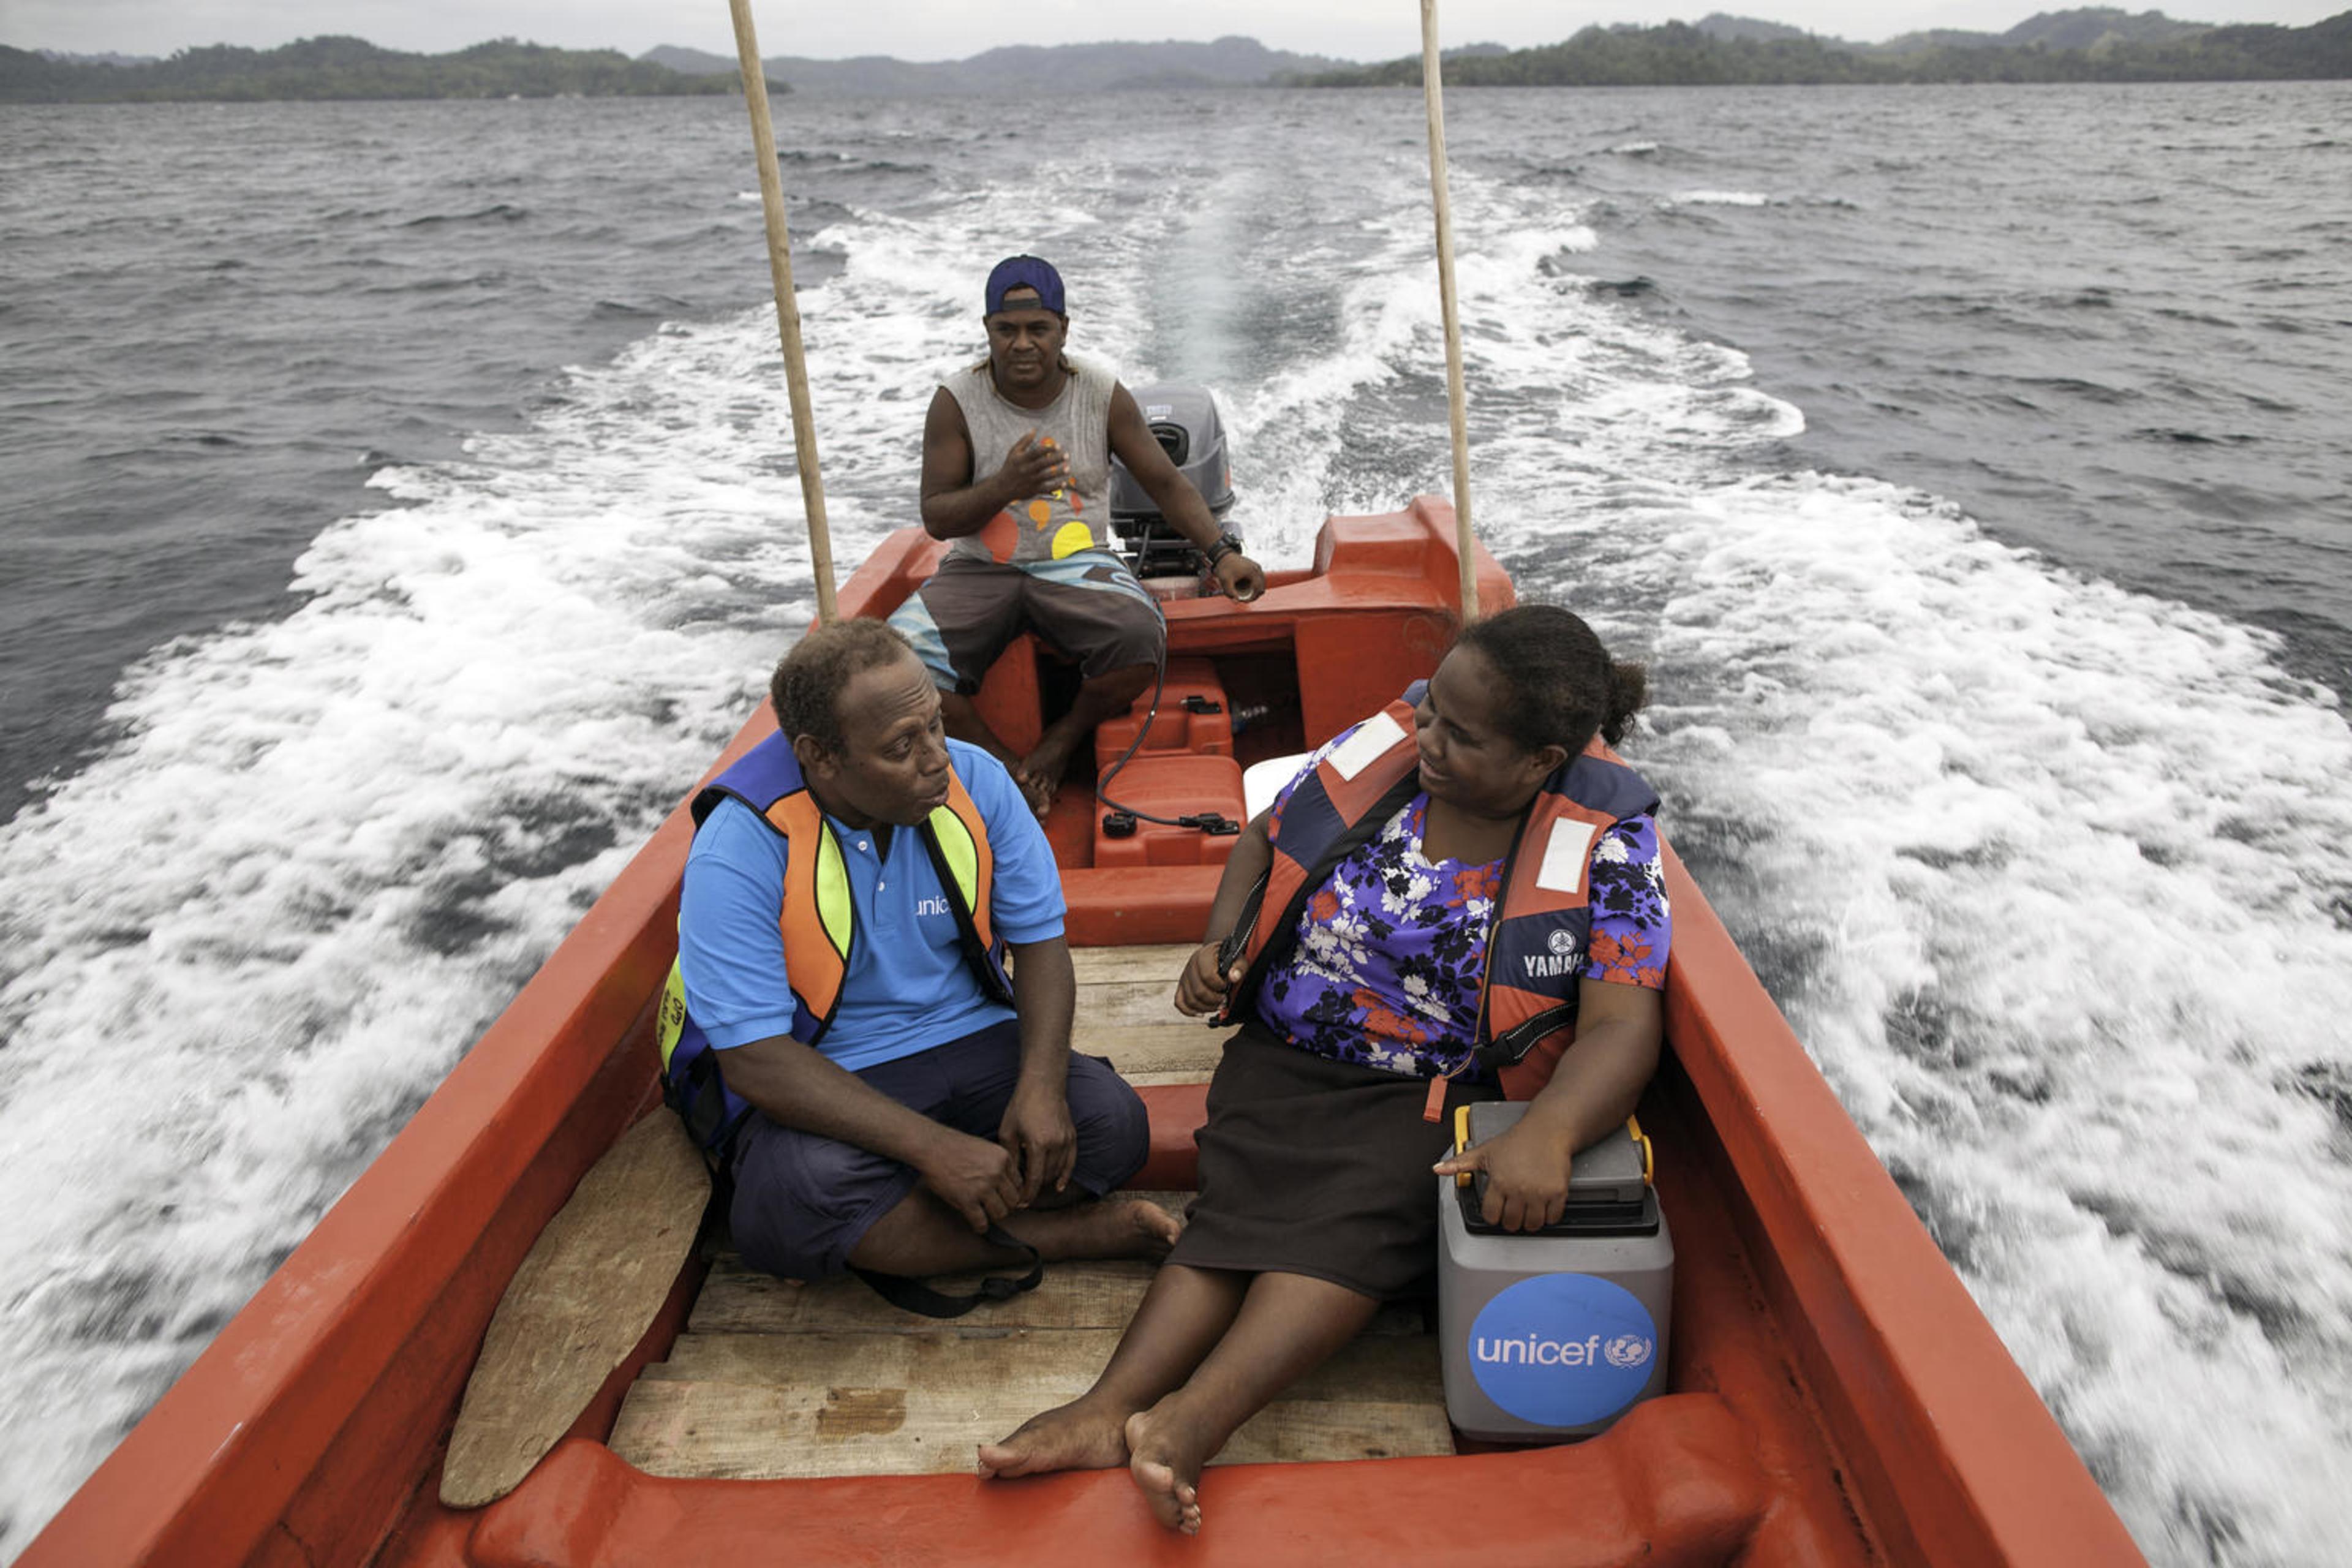 UNICEF Health Worker Paul Maesiala travels up to 3 hours by boat to reach children in remote Solomon Island communities